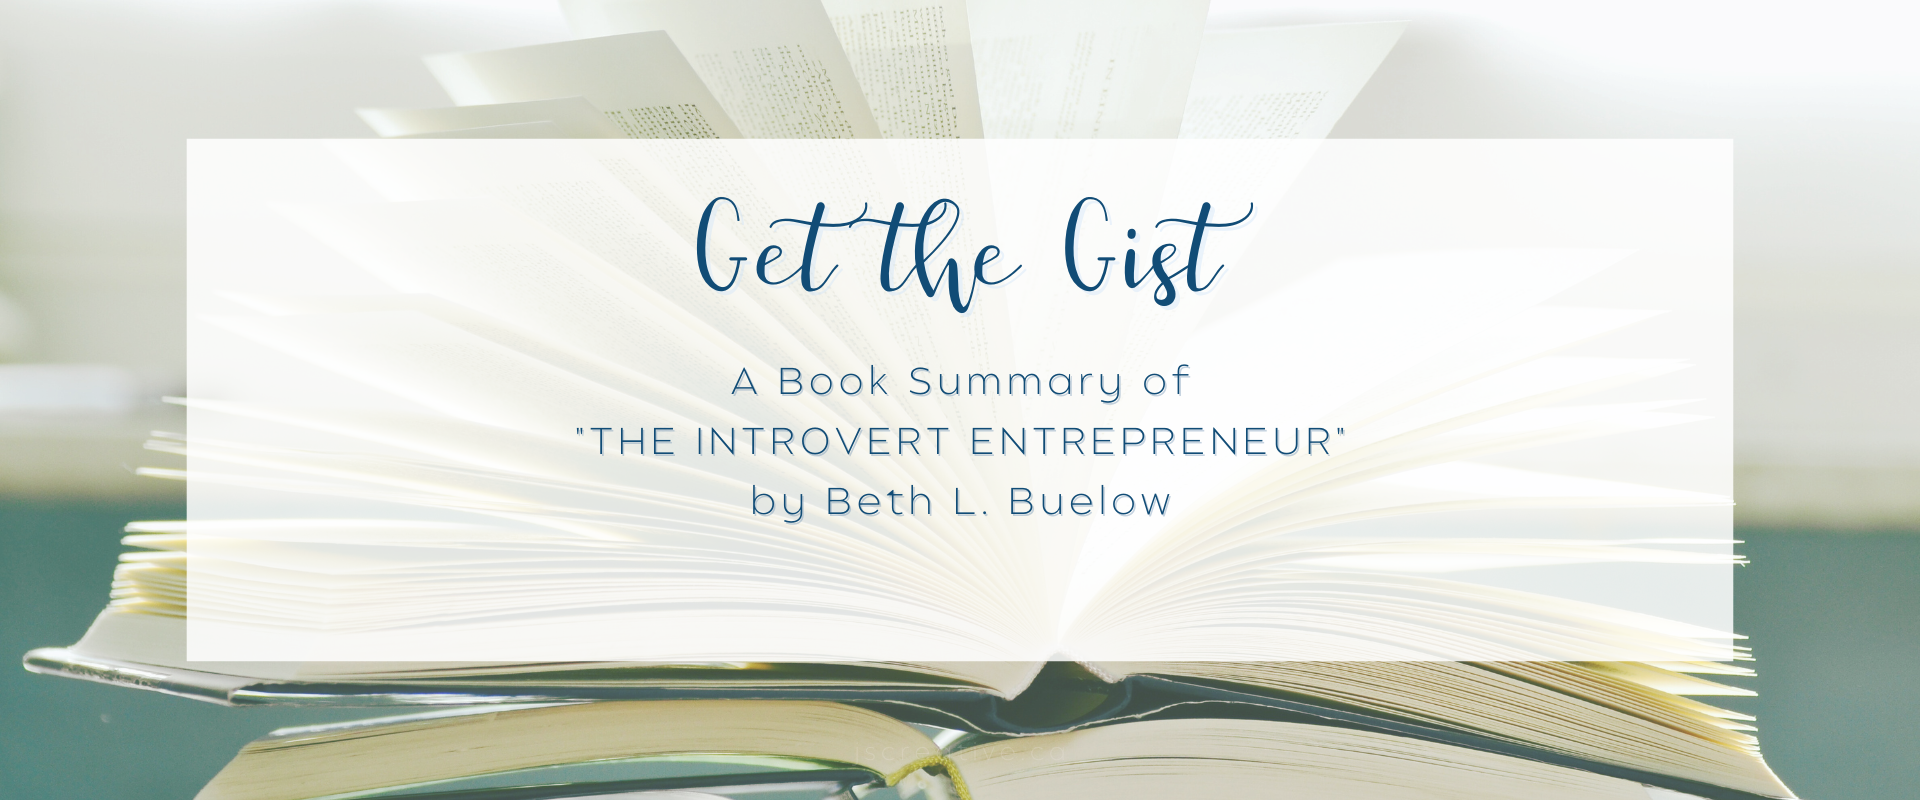 Get the Gist: A Book Summary of "The Introvert Entrepreneur" by Beth L. Buelow | jscreative.ca